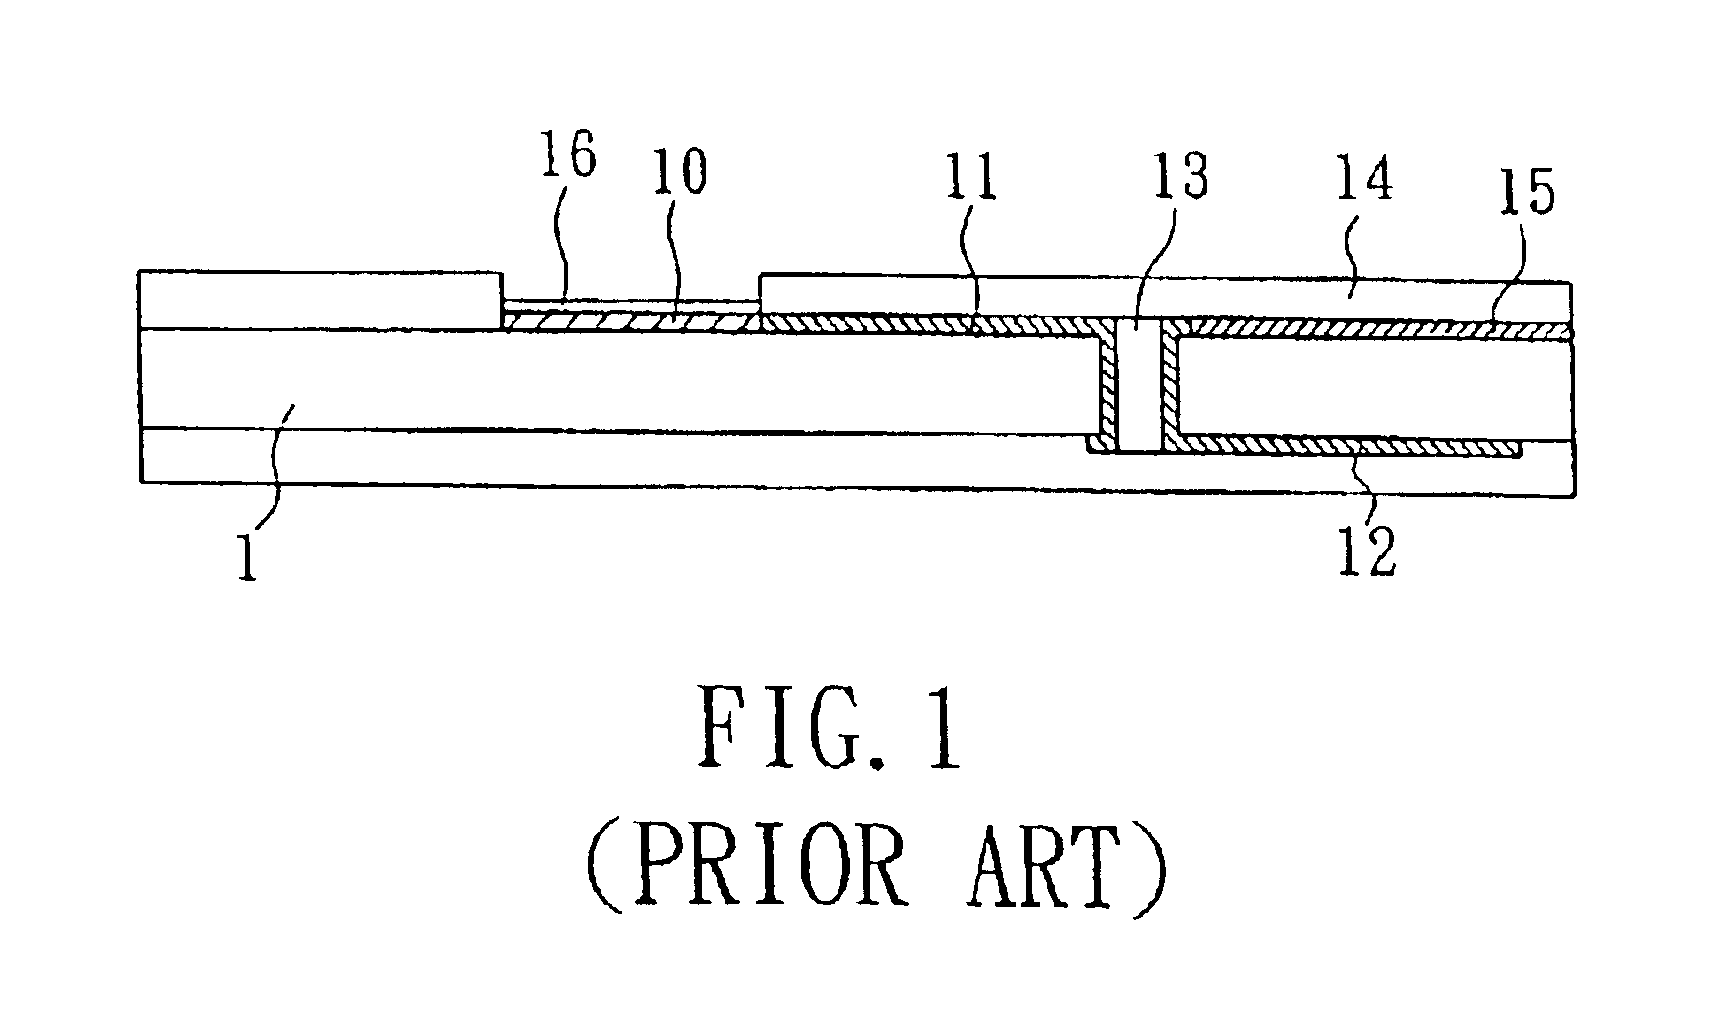 Substrate within a Ni/Au structure electroplated on electrical contact pads and method for fabricating the same